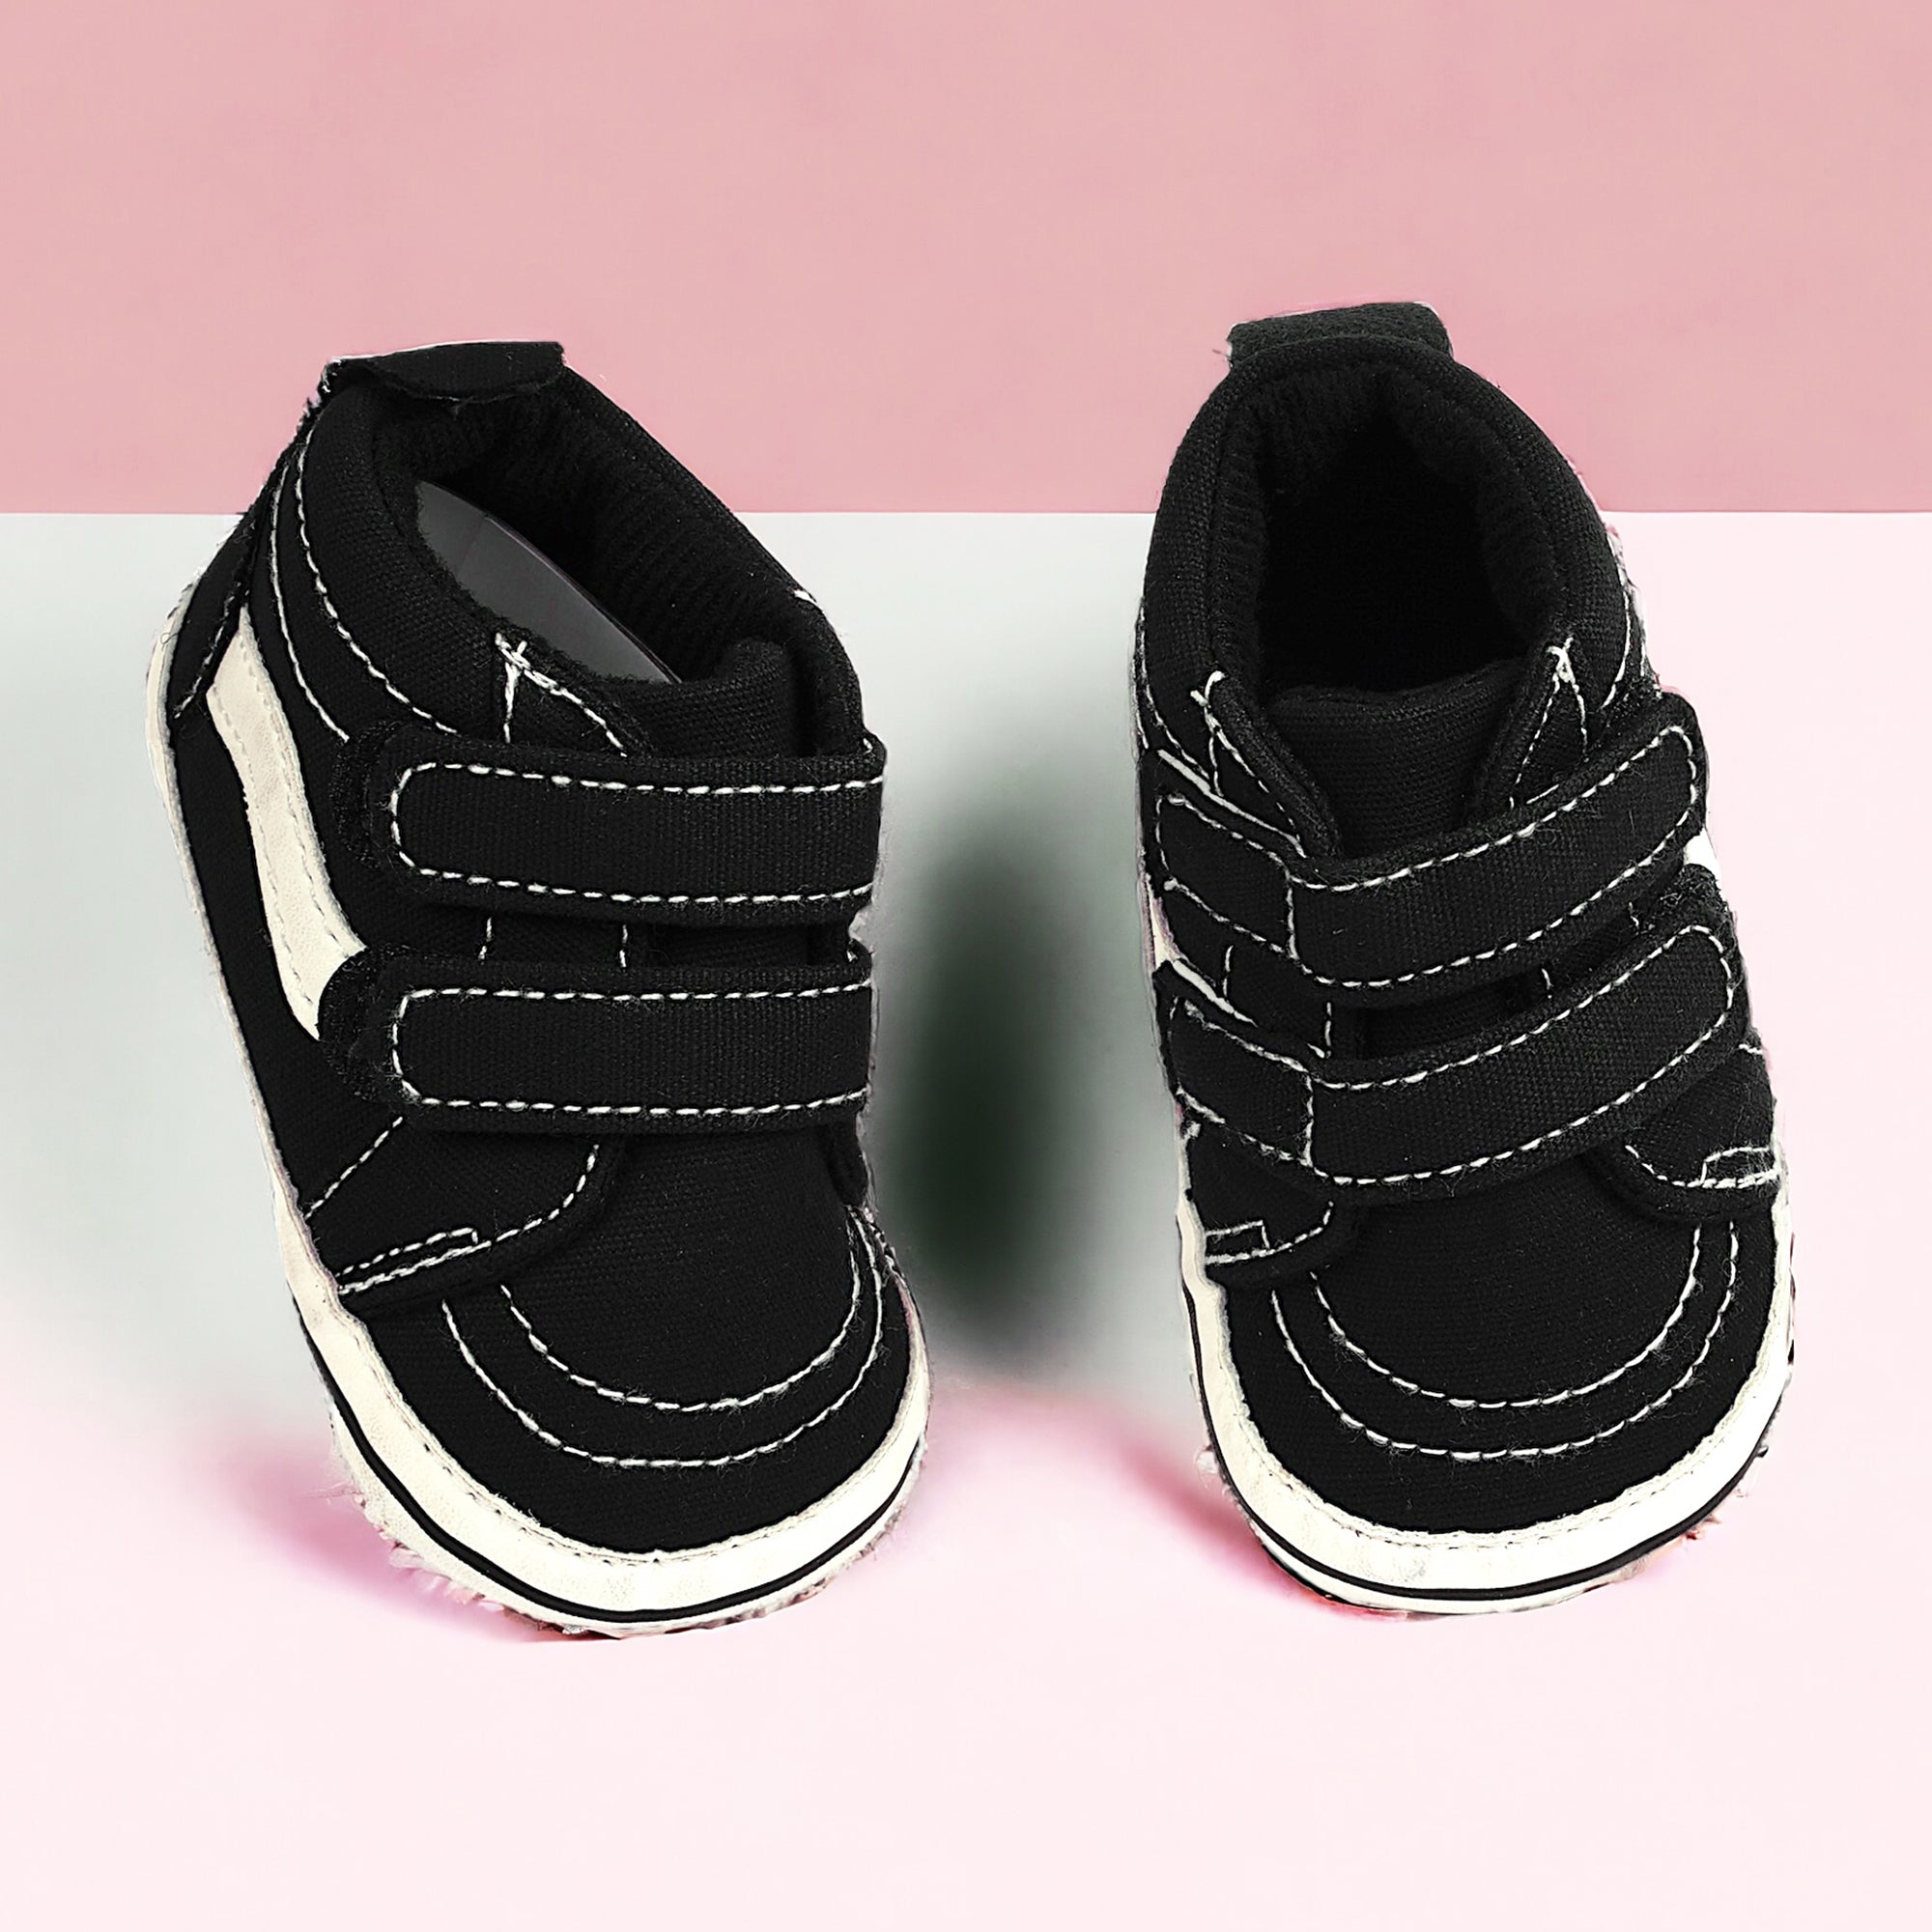 Baby Moo Stylish Casual Velcro Straps Anti-Skid Sneakers - Black